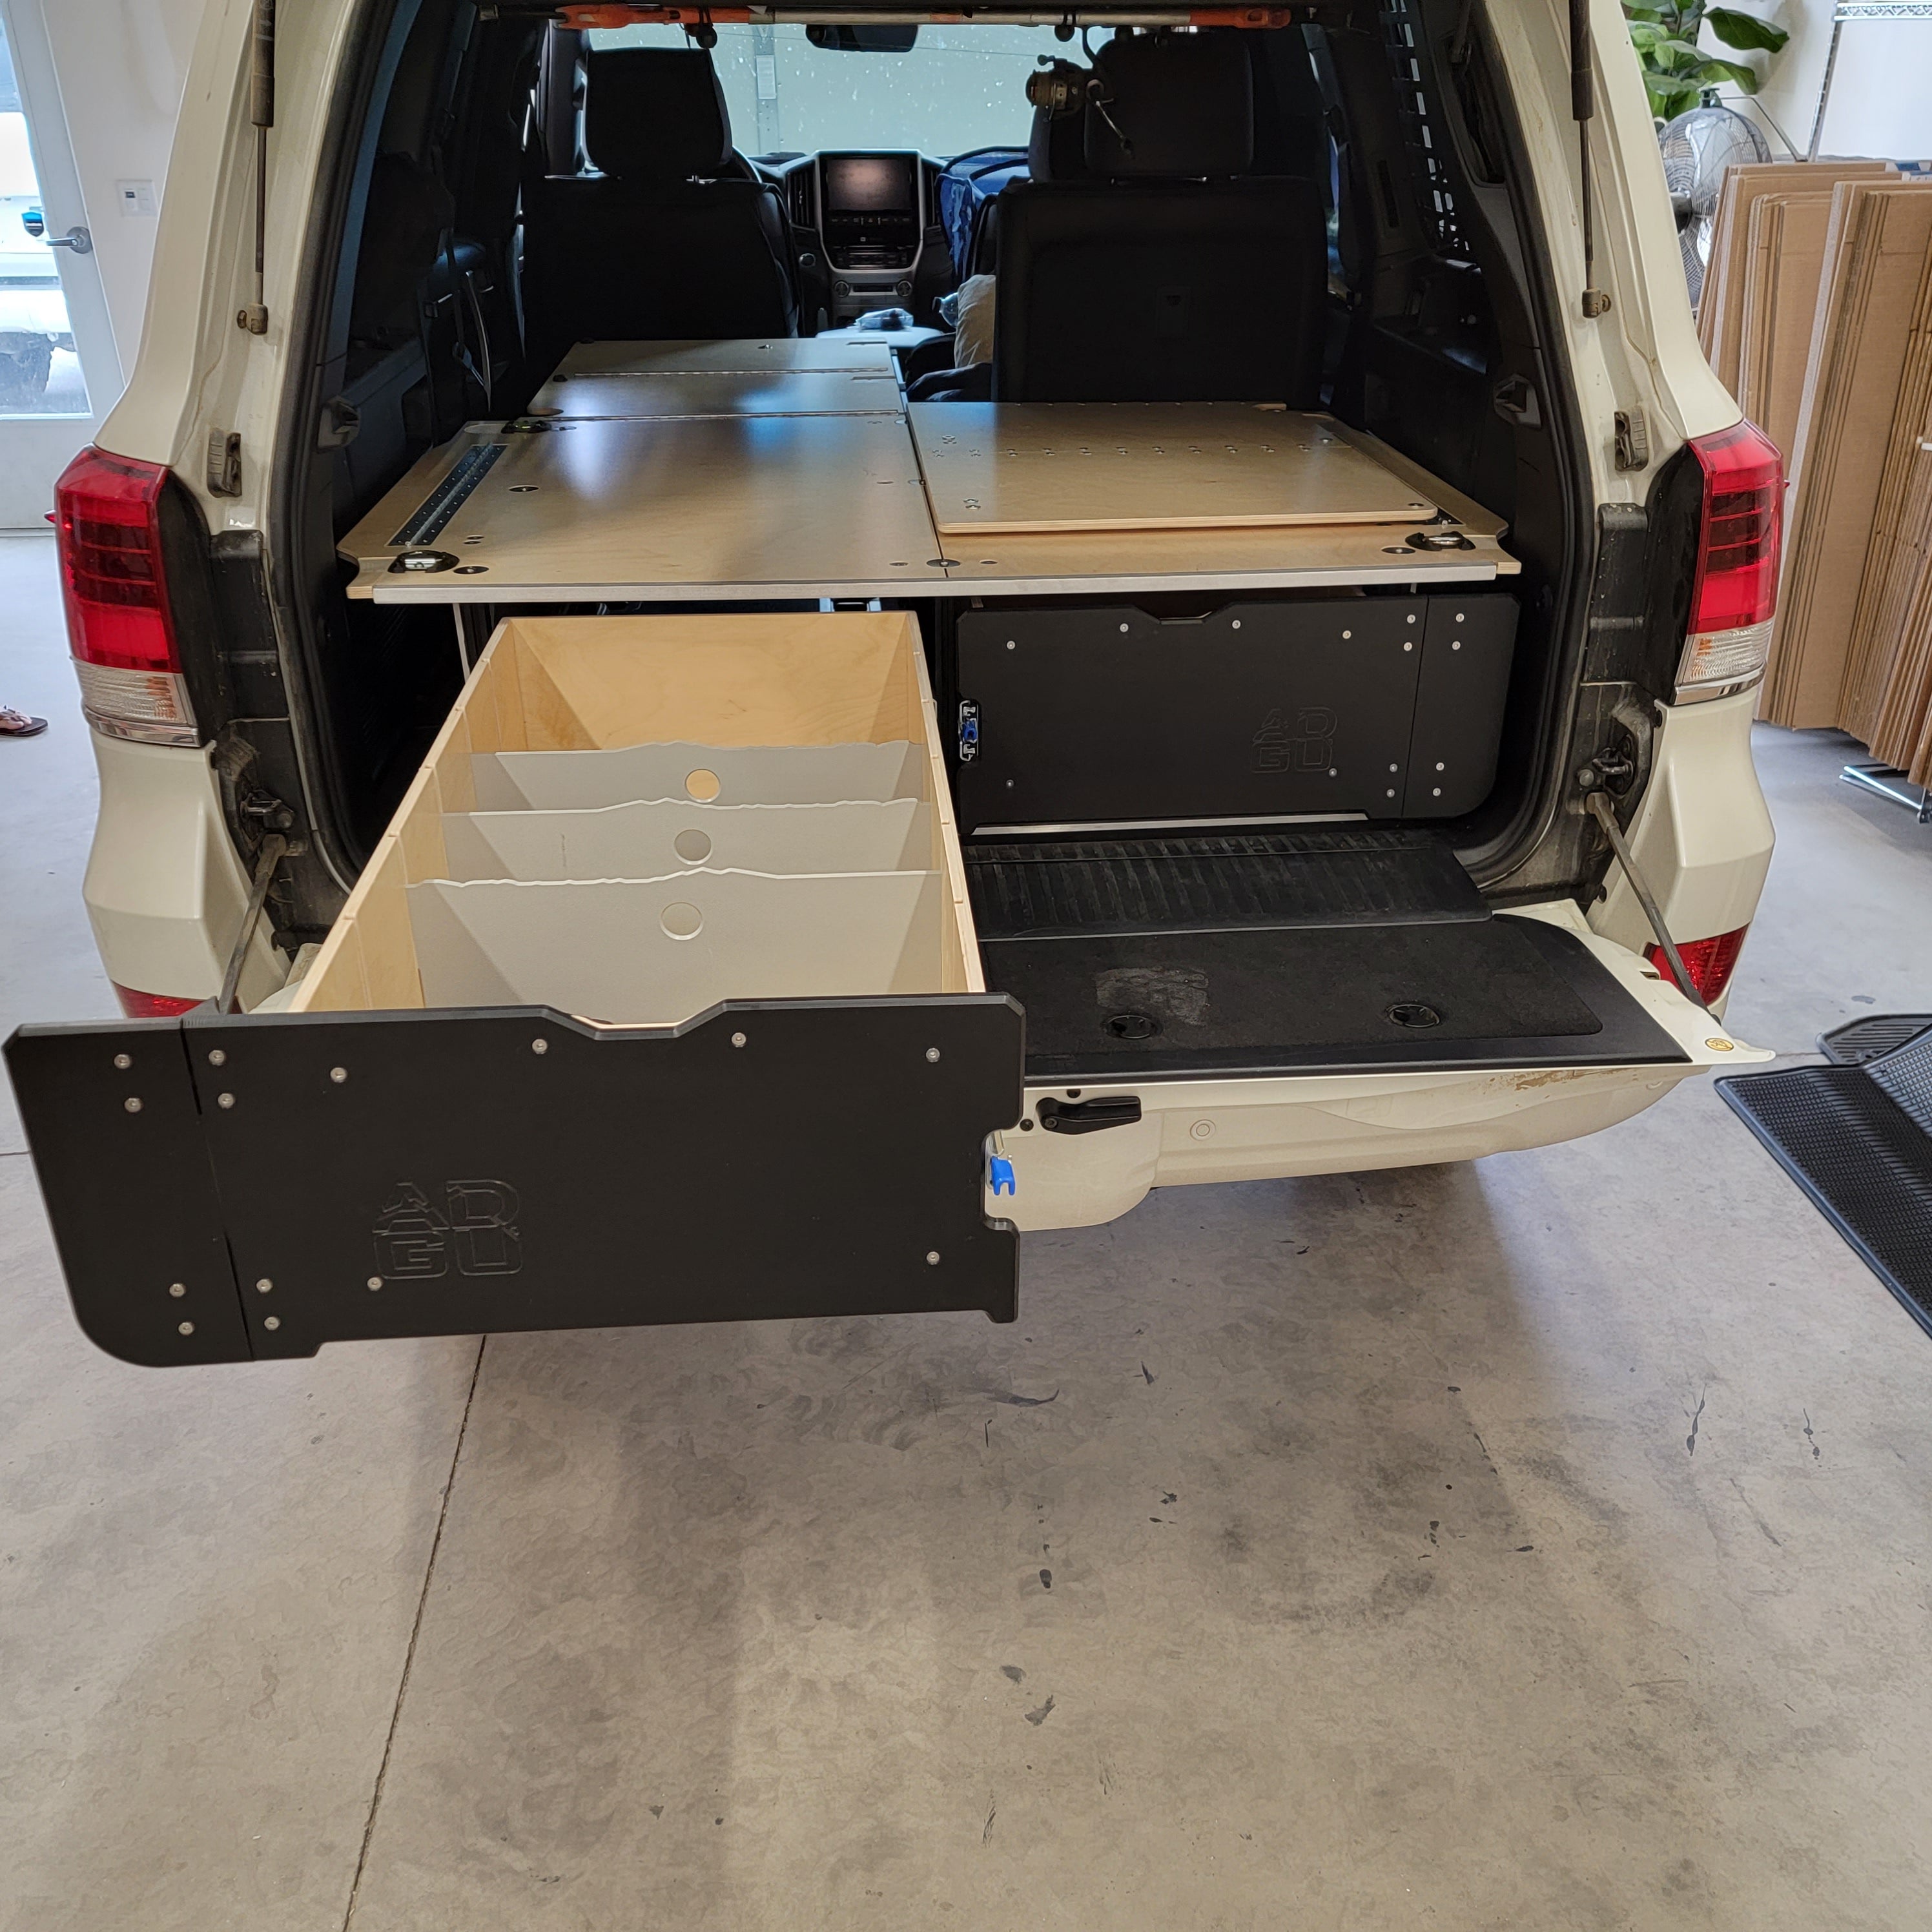 200 Series Toyota Land Cruiser LX570 drawer system with sleeping platform for vehicle organization. This set up includes a 60% Seat Delete frame